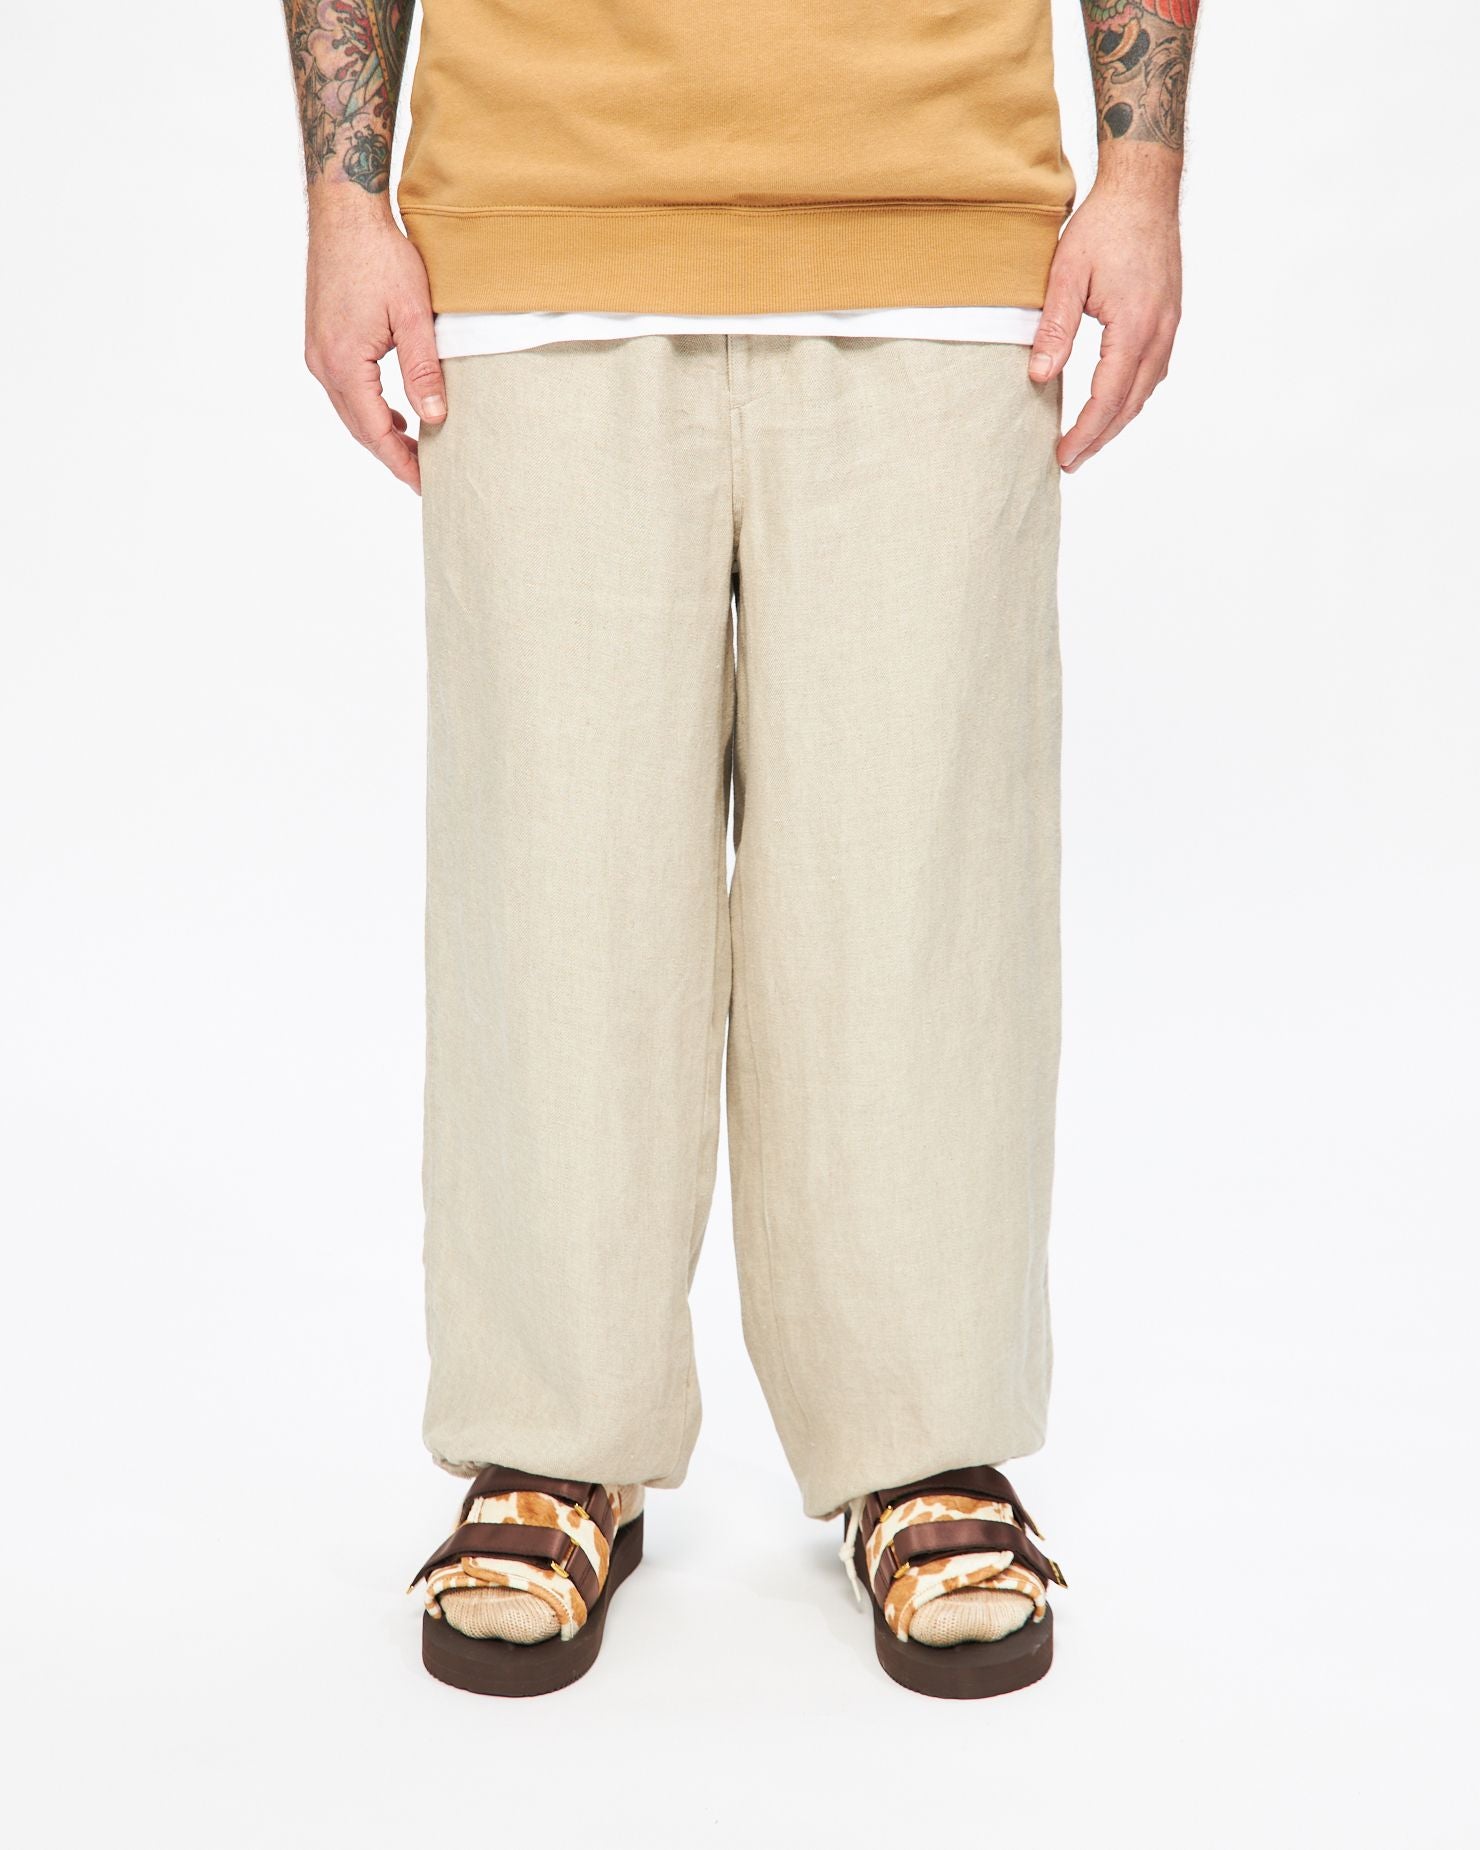 100% linen drawstring wide easy pant